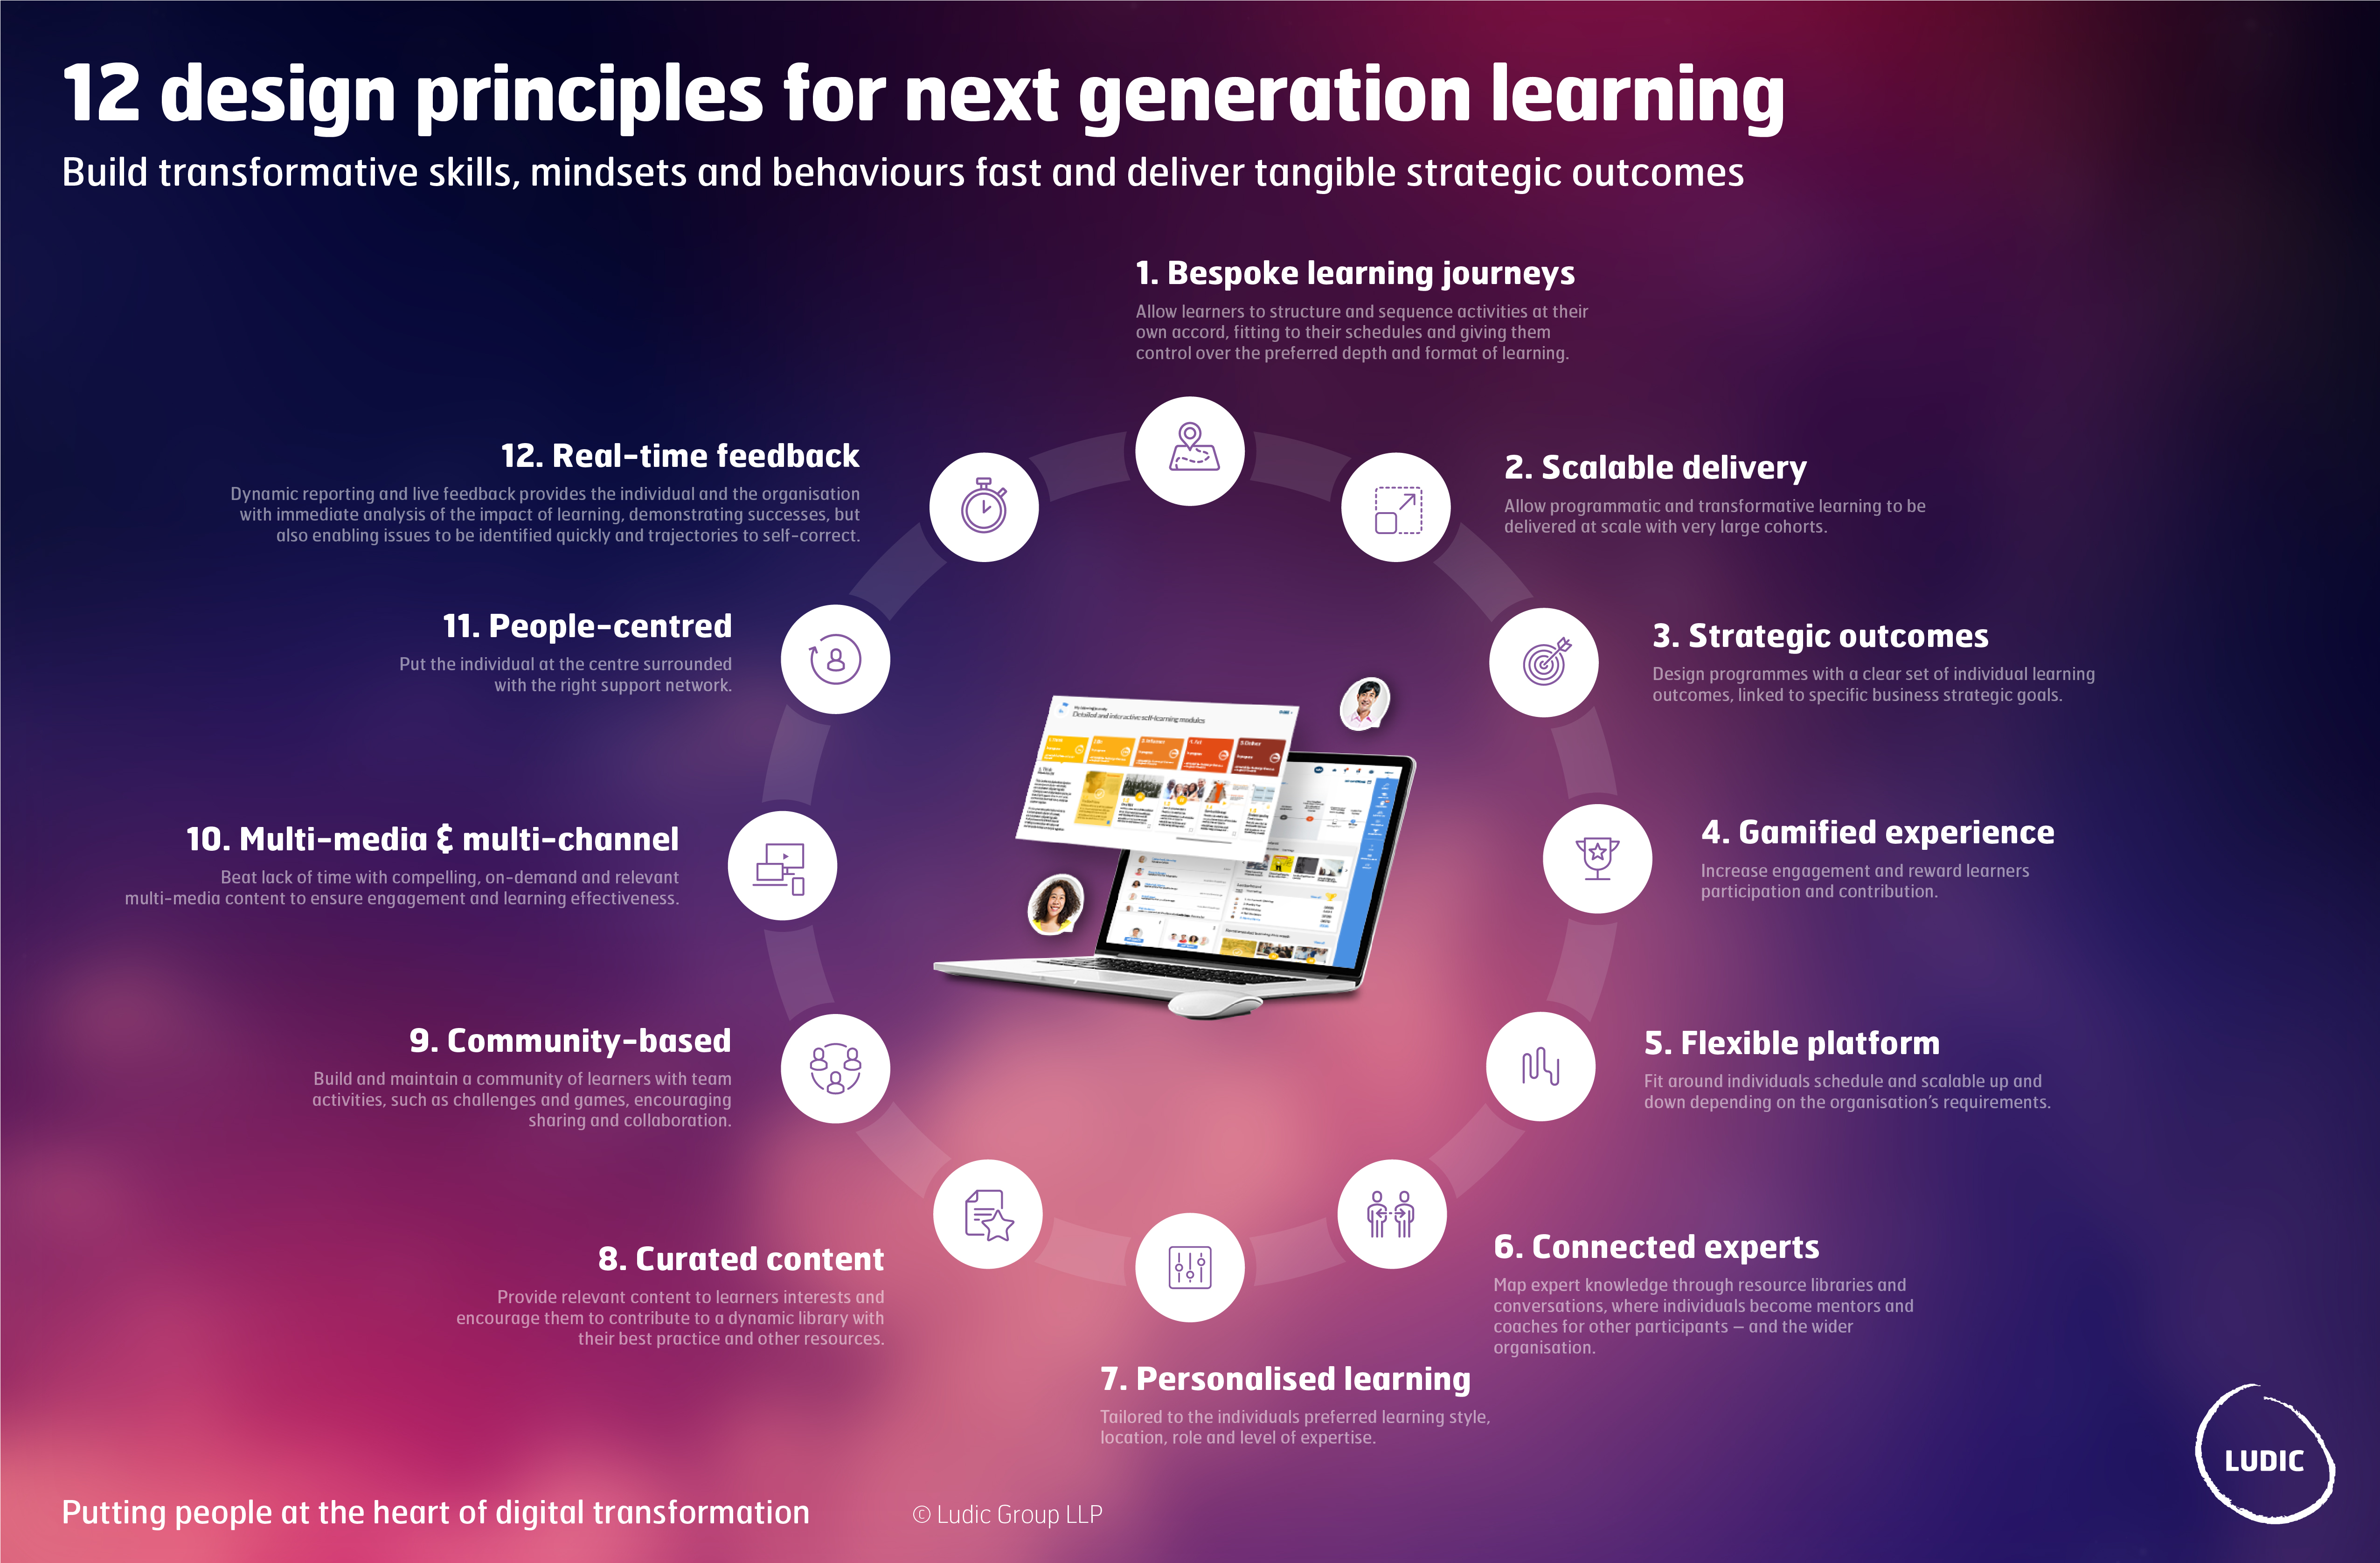 2019_12principles_for_next_gen_learning_new The 12 design principles for next generation learning - Ludic Consulting